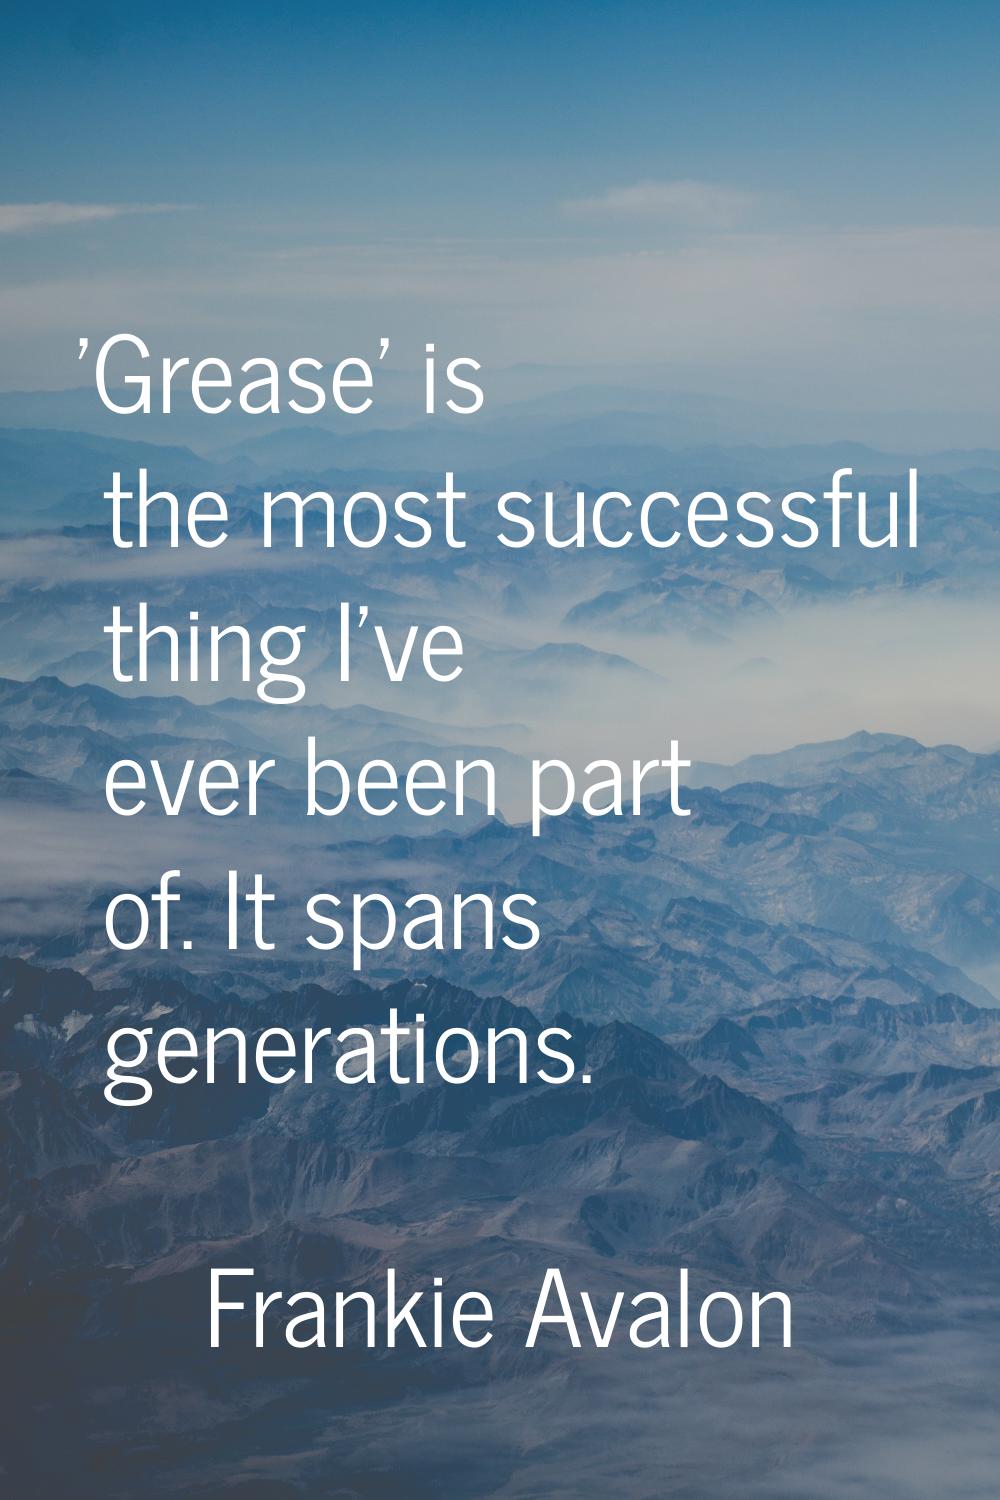 'Grease' is the most successful thing I've ever been part of. It spans generations.